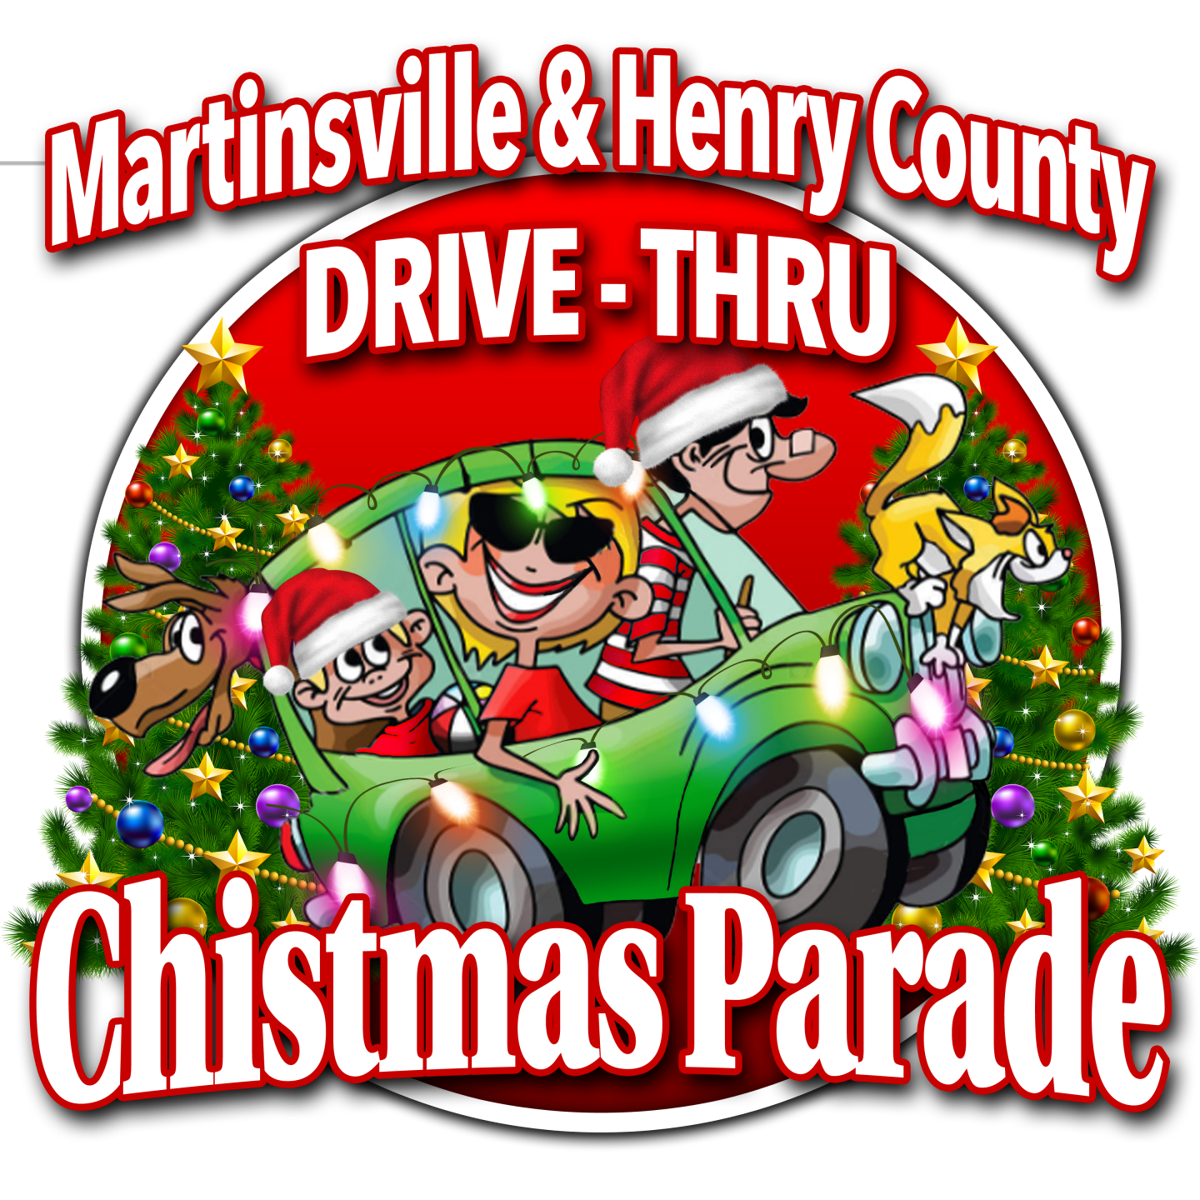 Martinsville's Christmas parade open to all